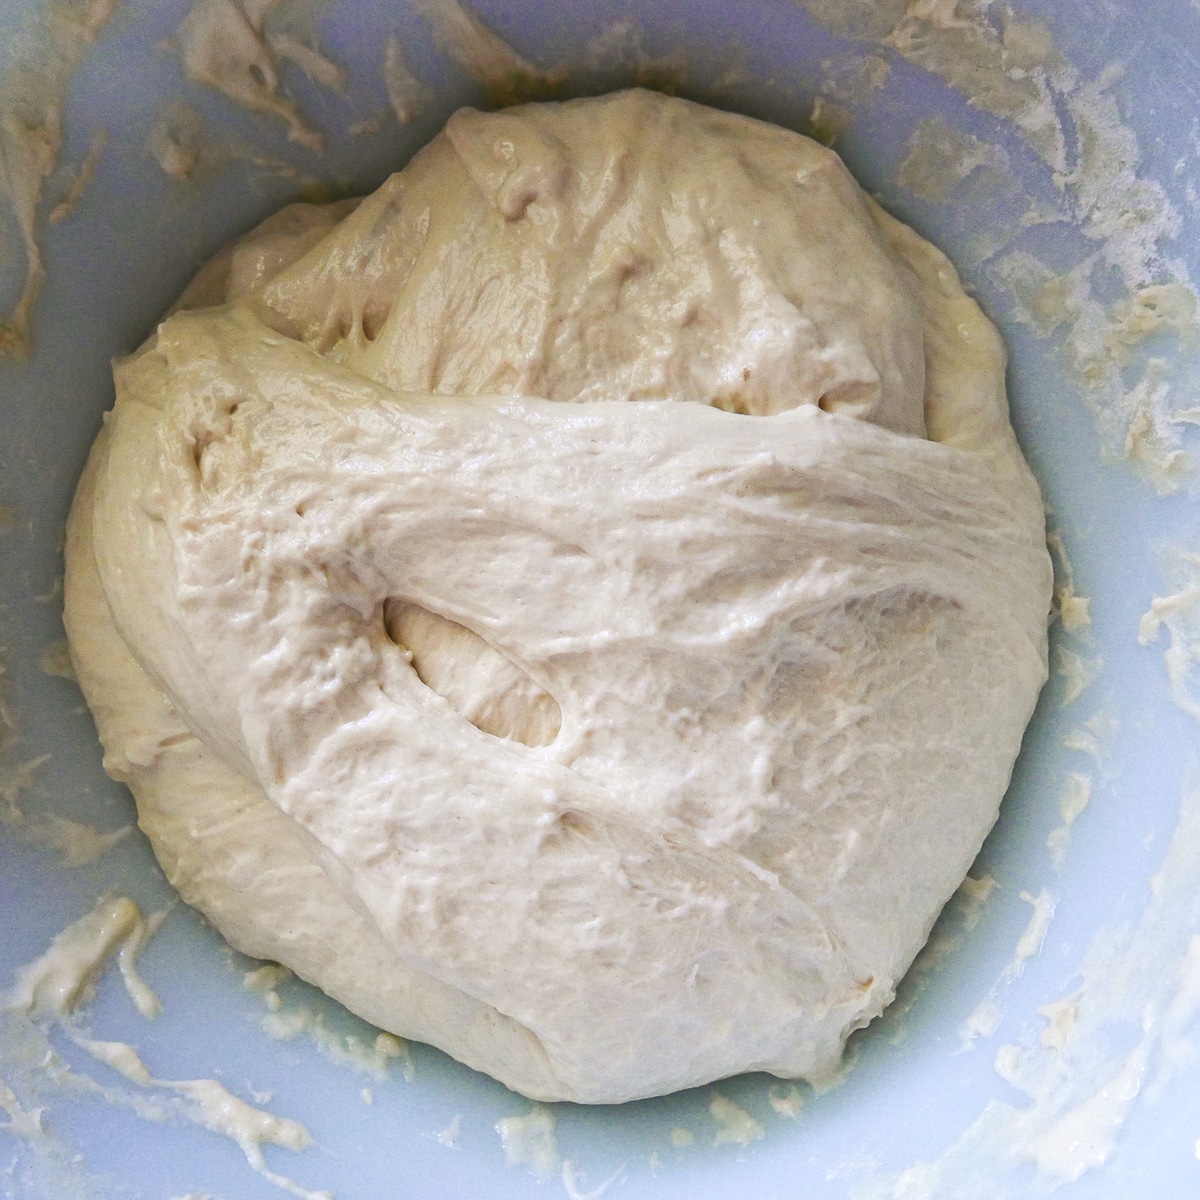 ciabatta roll dough doubled in size and resting in a bowl.